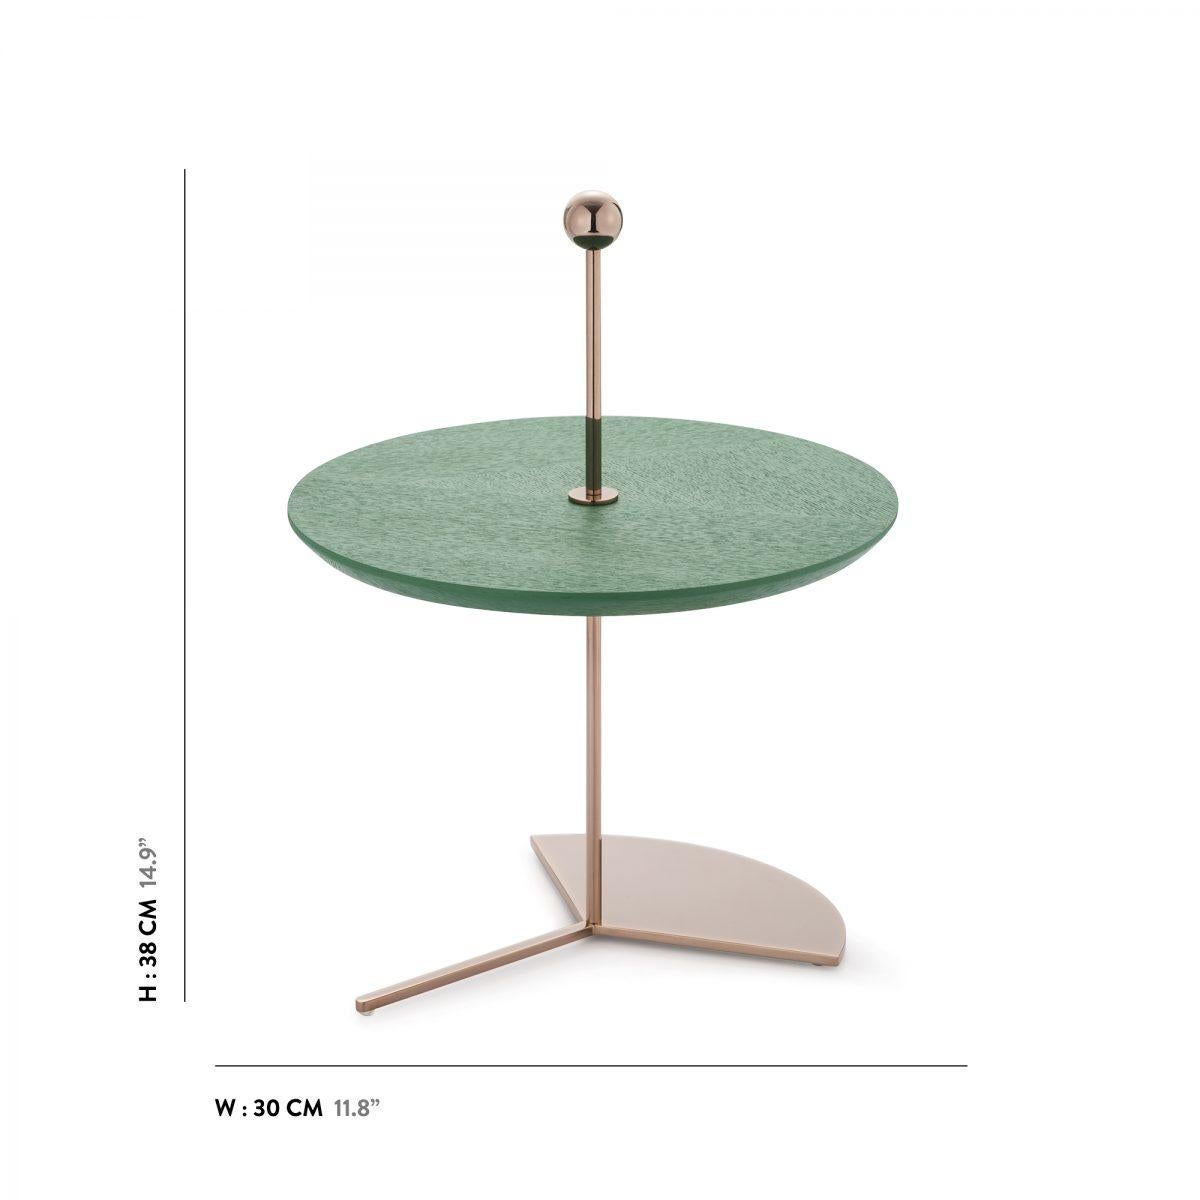 French Off The Moon N°2 Cake Stand by Thomas Dariel